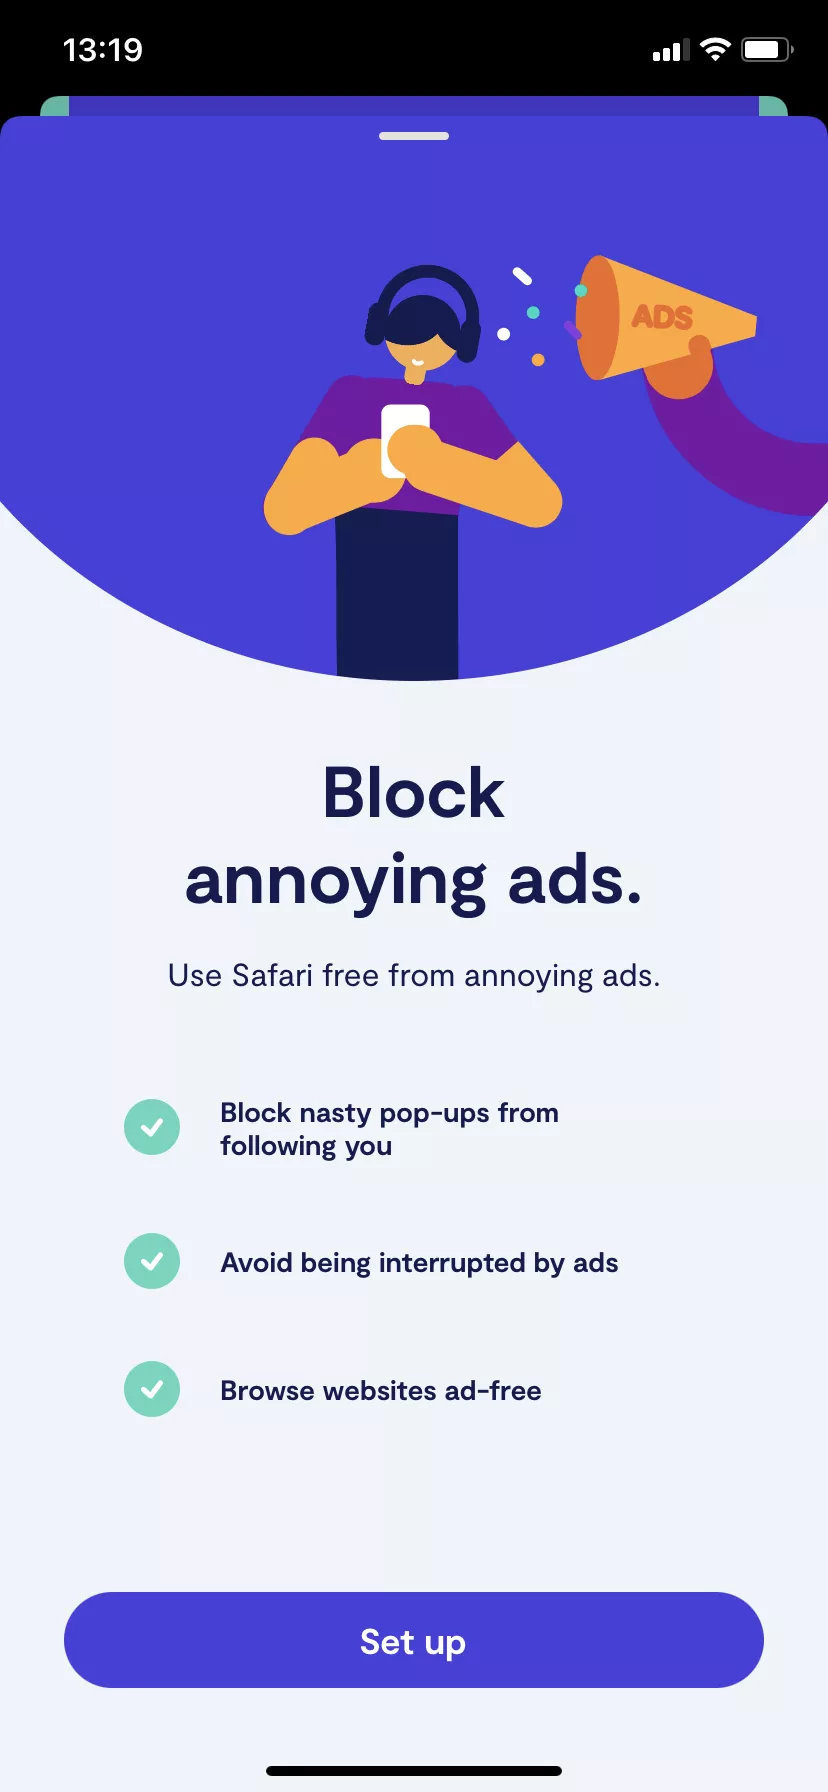 AdBlock for Safari 2.66.0: New Cryptocurrency Mining Protection, Better  Blocking of Stubborn Ads, Interface Updates, and a Bug Fix, by AdBlock